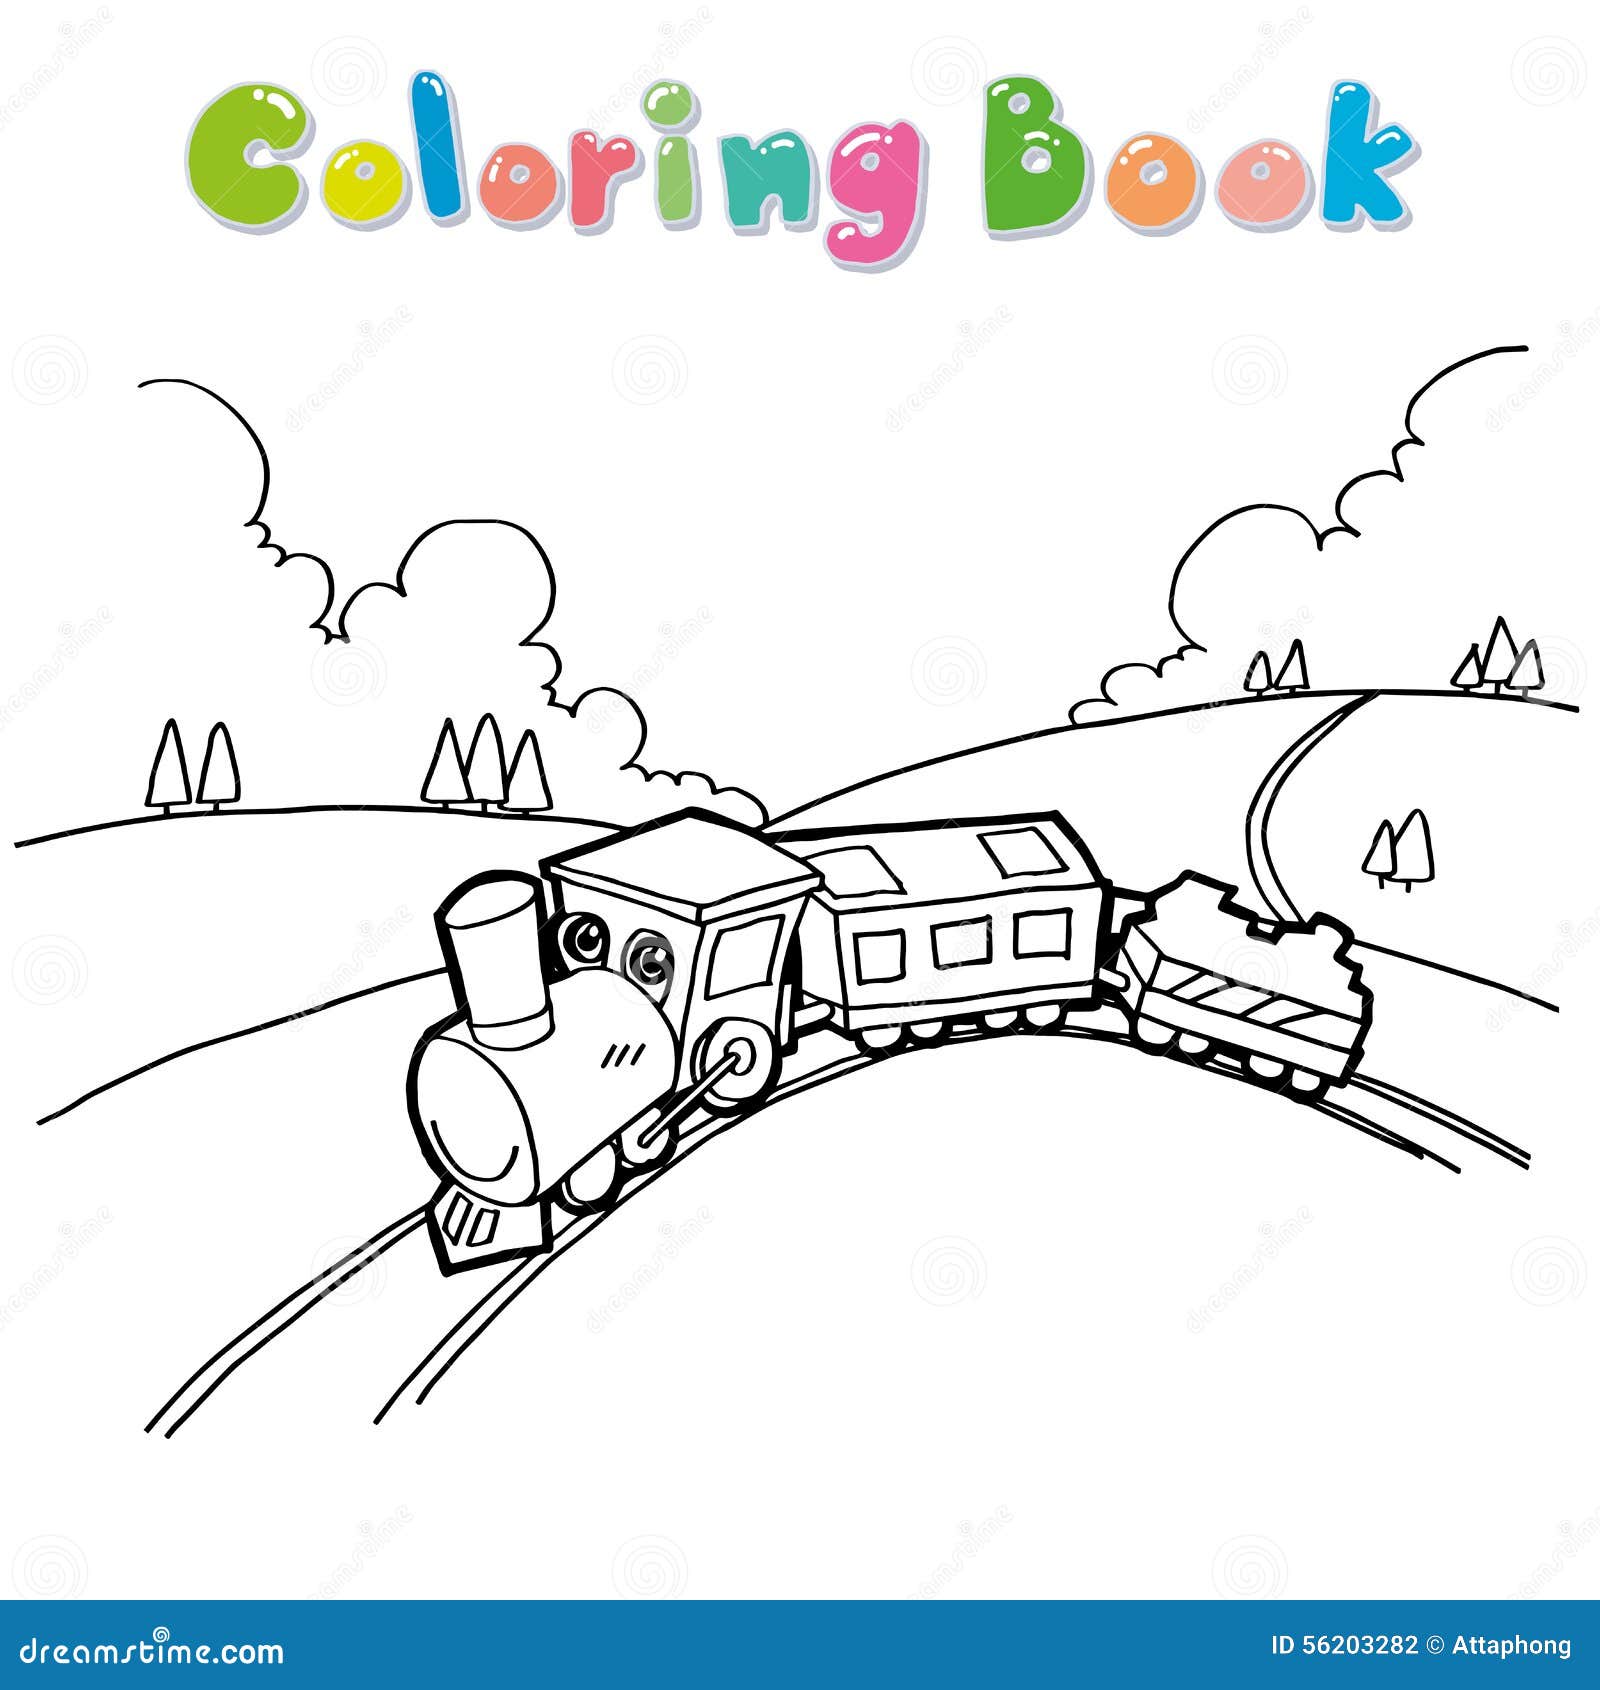 Train coloring page stock illustrations â train coloring page stock illustrations vectors clipart